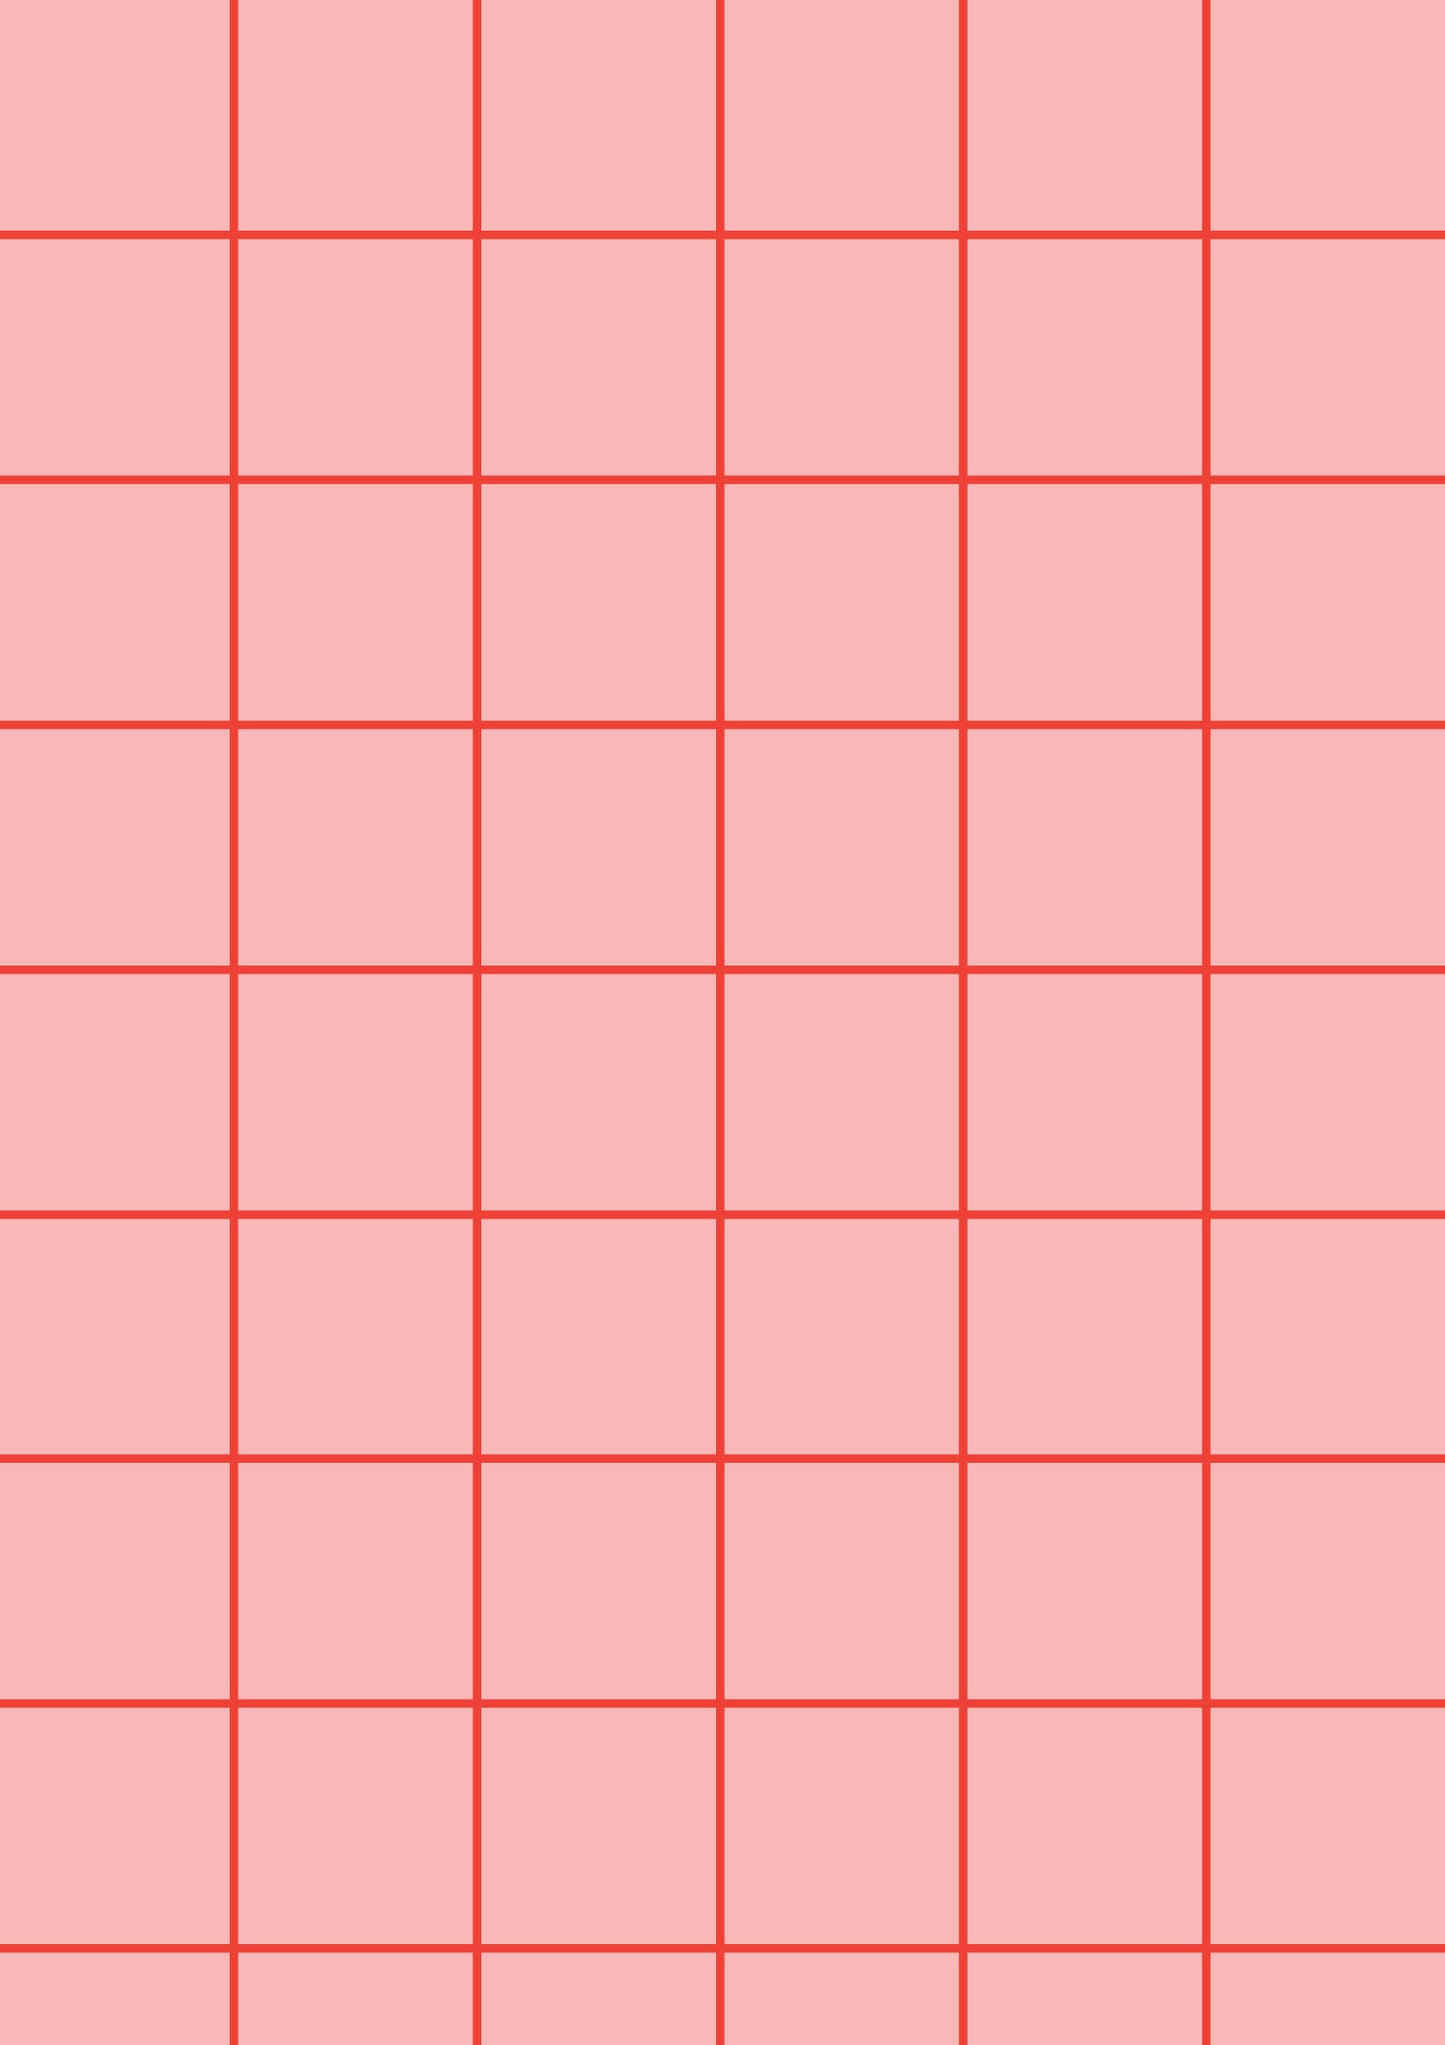 Pastel Pink A1 Photography Backdrop with Red Grid